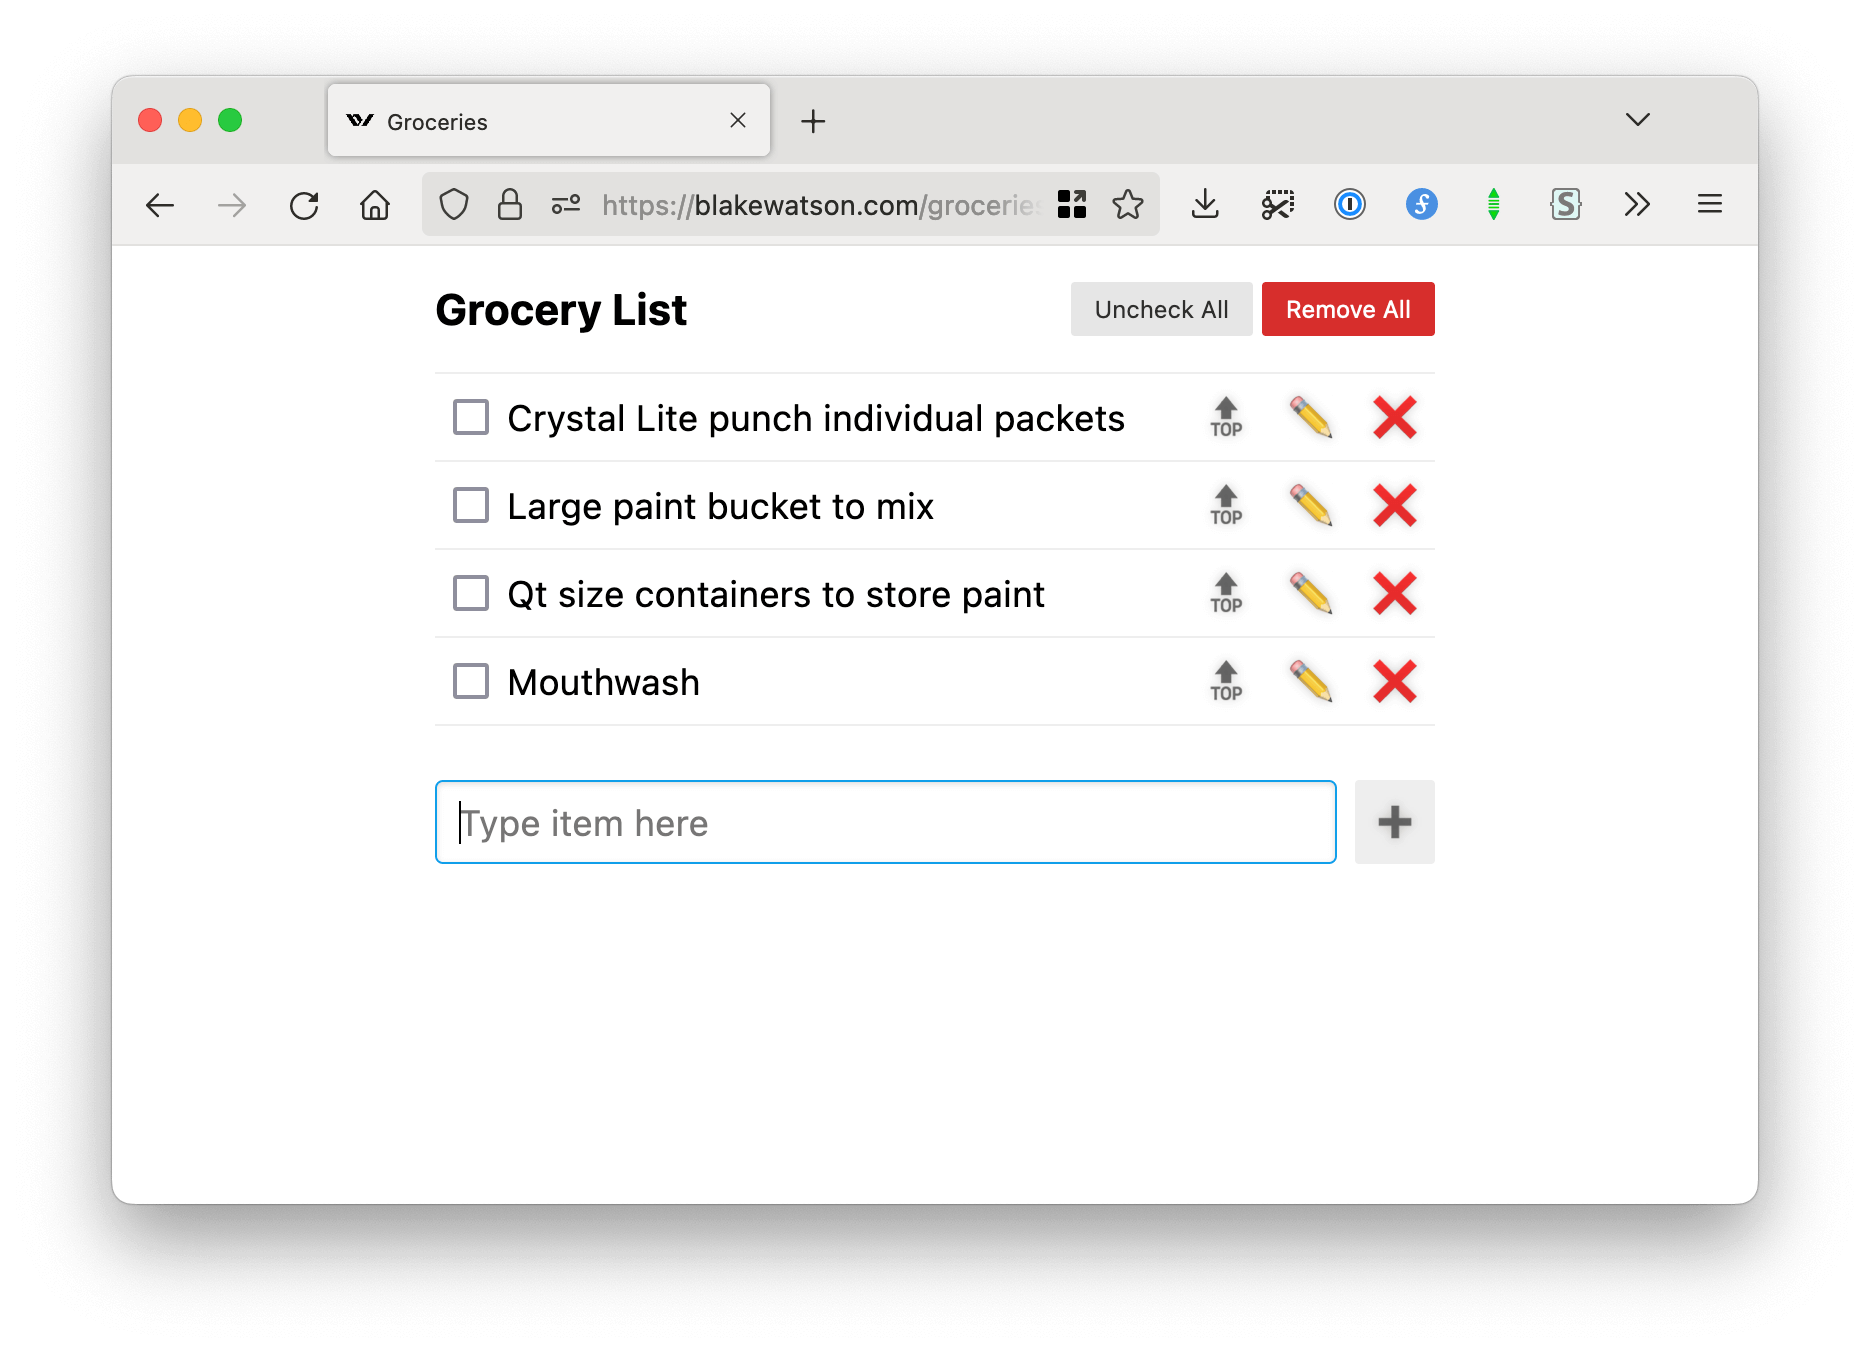 Screenshot of the groceries app. Header is Grocery List. Below that is a list of four grocery items with a checkbox by each one. Each item has 3 action buttons to the right of it: top emoji, pencil emoji, and red ex emoji. Underneath the list is a text box for adding a new item.